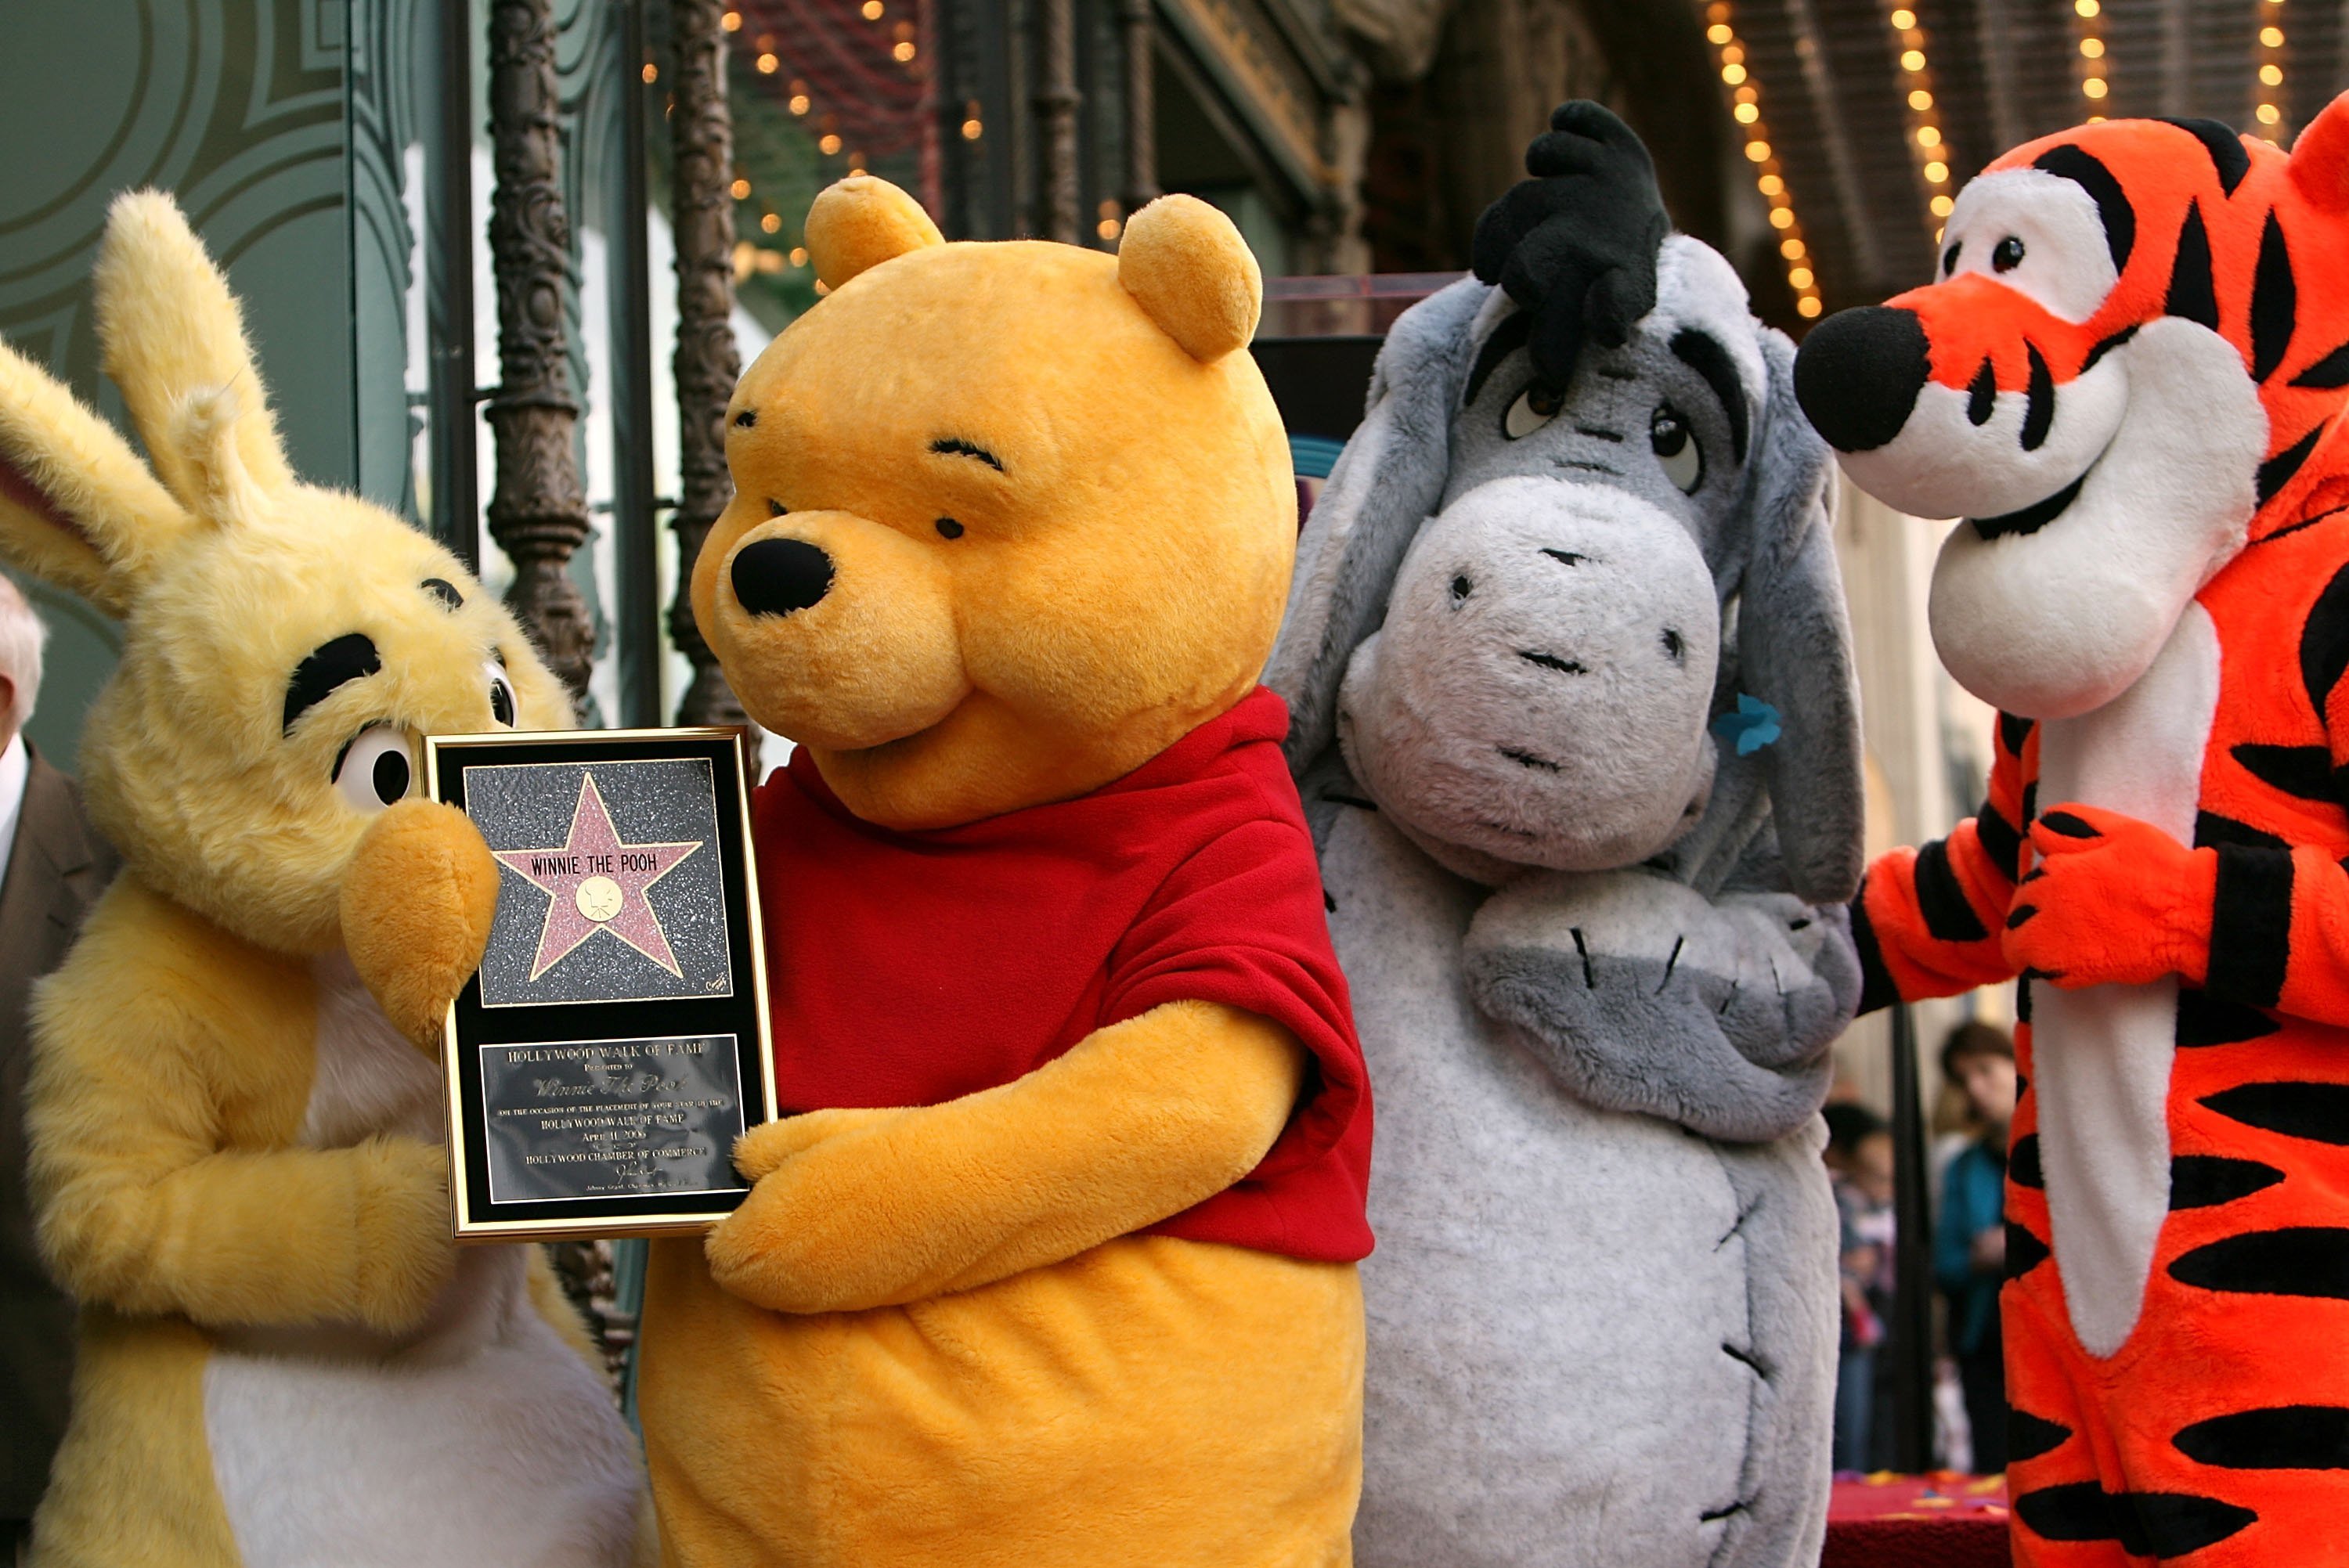 'Winnie the Pooh' characters Rabbit, Winnie the Pooh, Eeyore, and Tigger posing together after receiving a star on the Hollywood Walk of Fame.